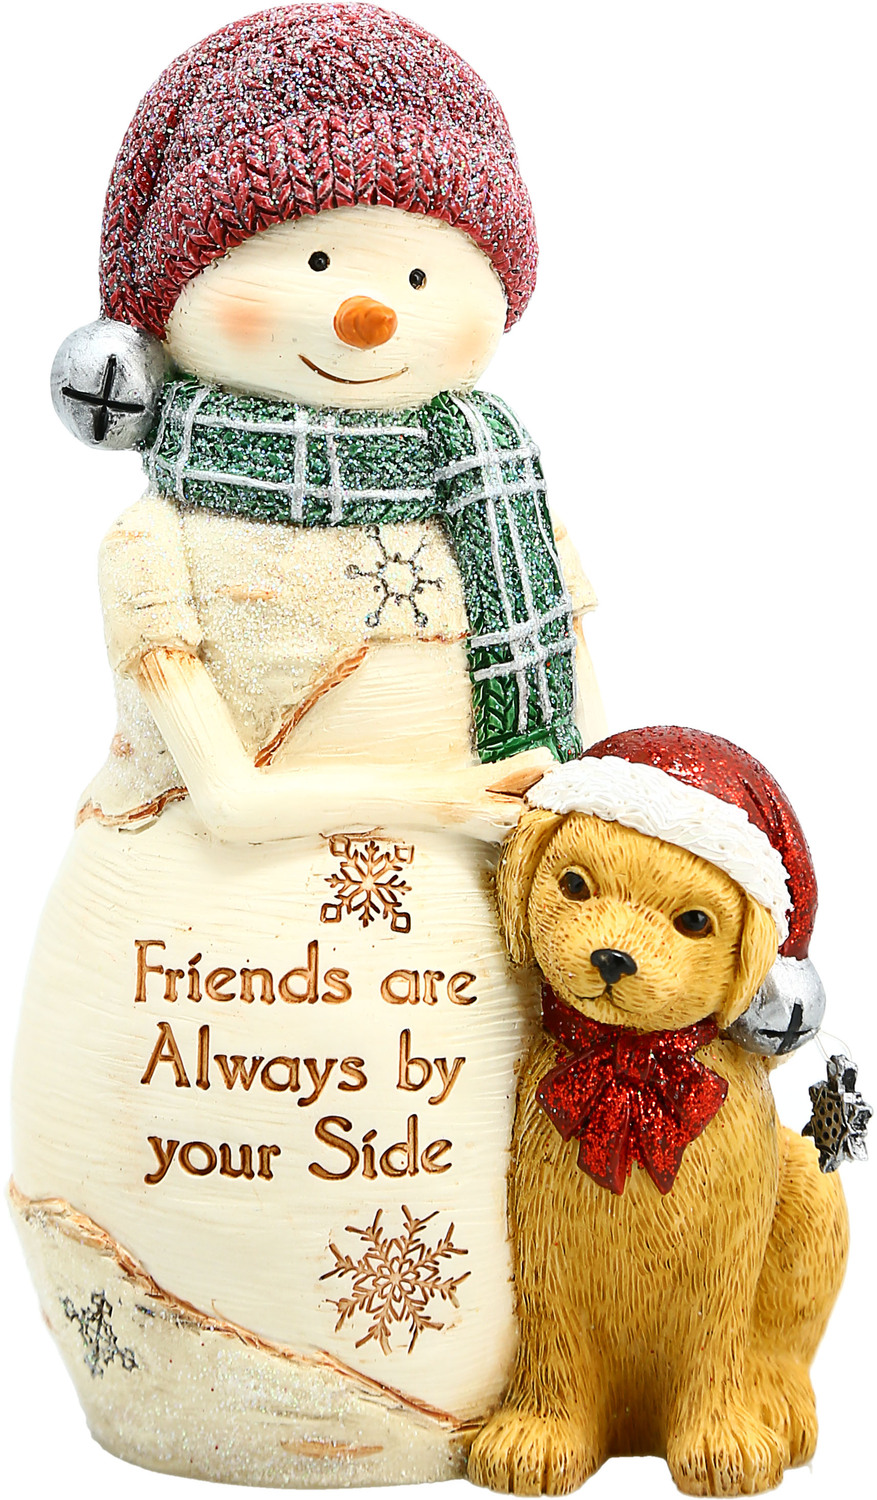 Friends By Your Side by The Birchhearts - Friends By Your Side - 5" Snowman with Dog